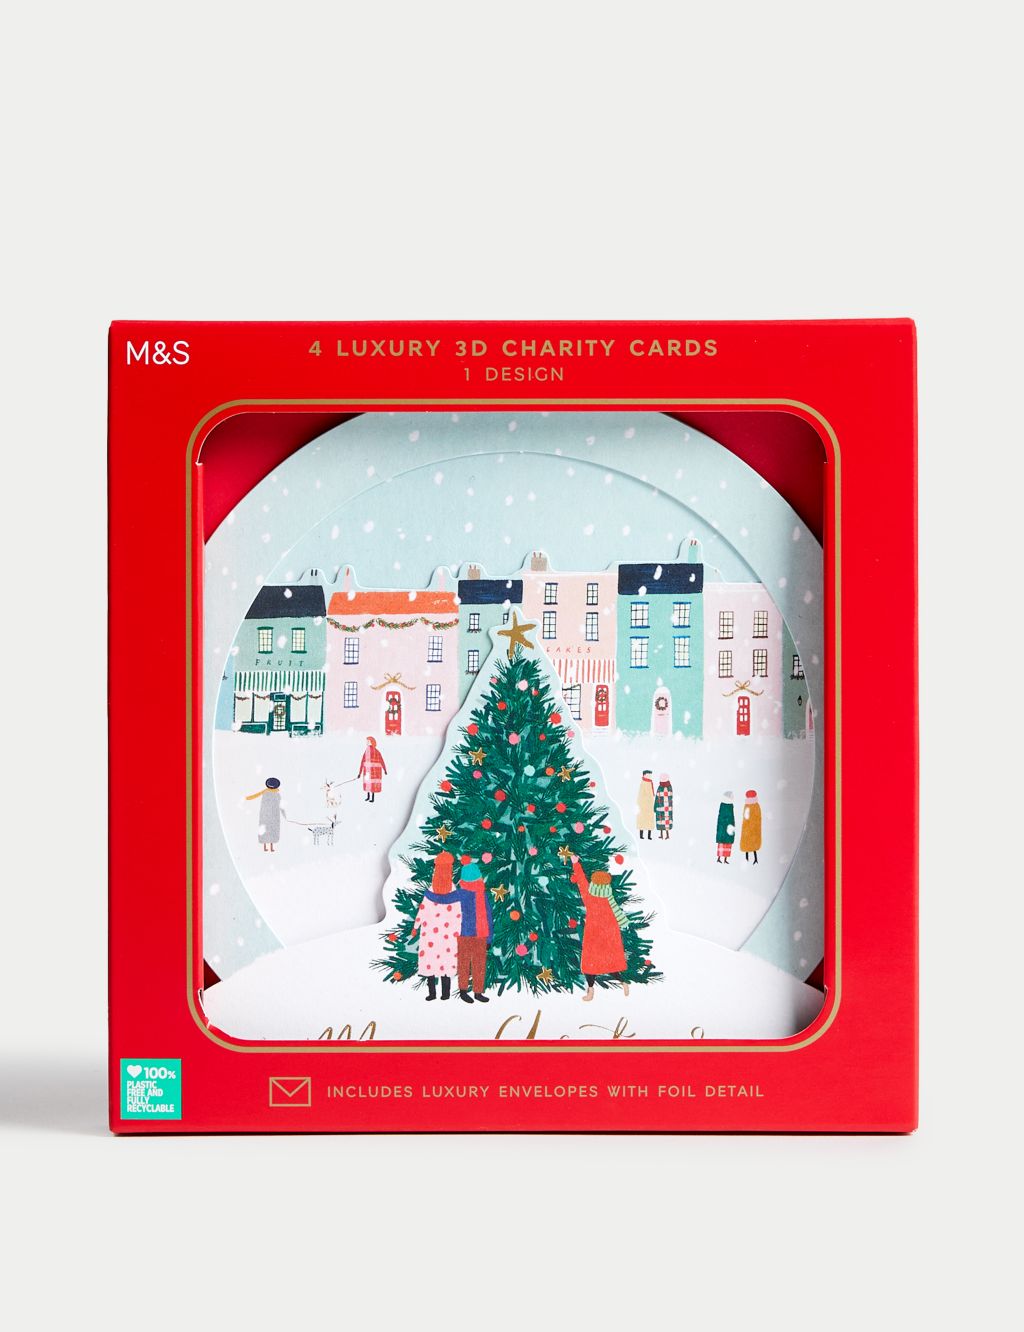 Luxury Charity Christmas Cards - Pack of 4, 3D Snow Globe Design